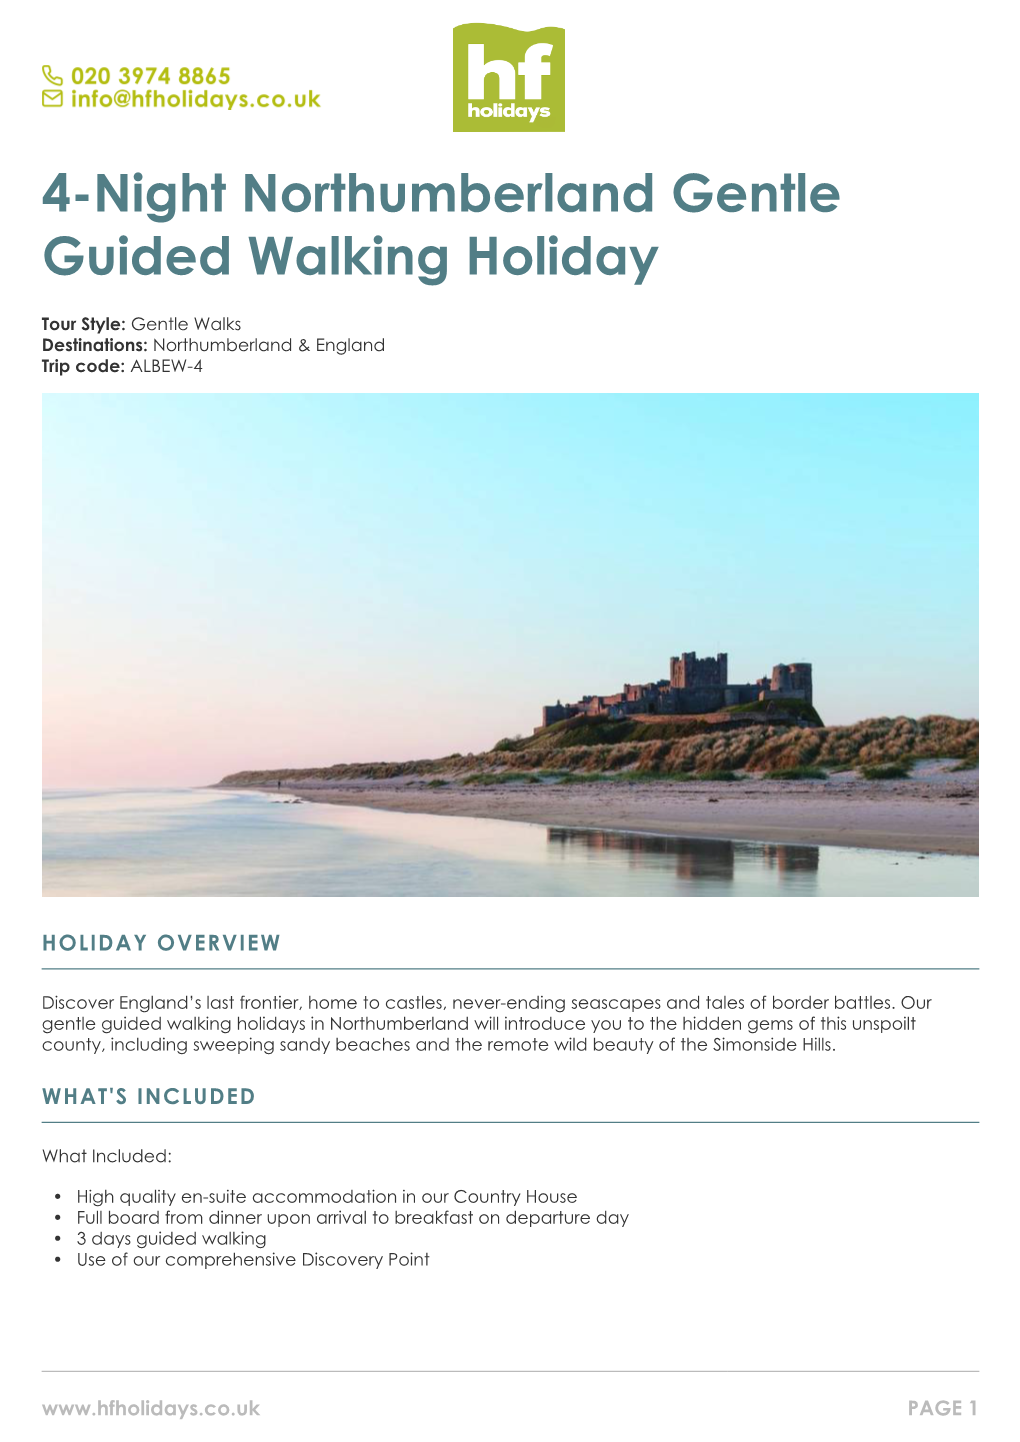 4-Night Northumberland Gentle Guided Walking Holiday